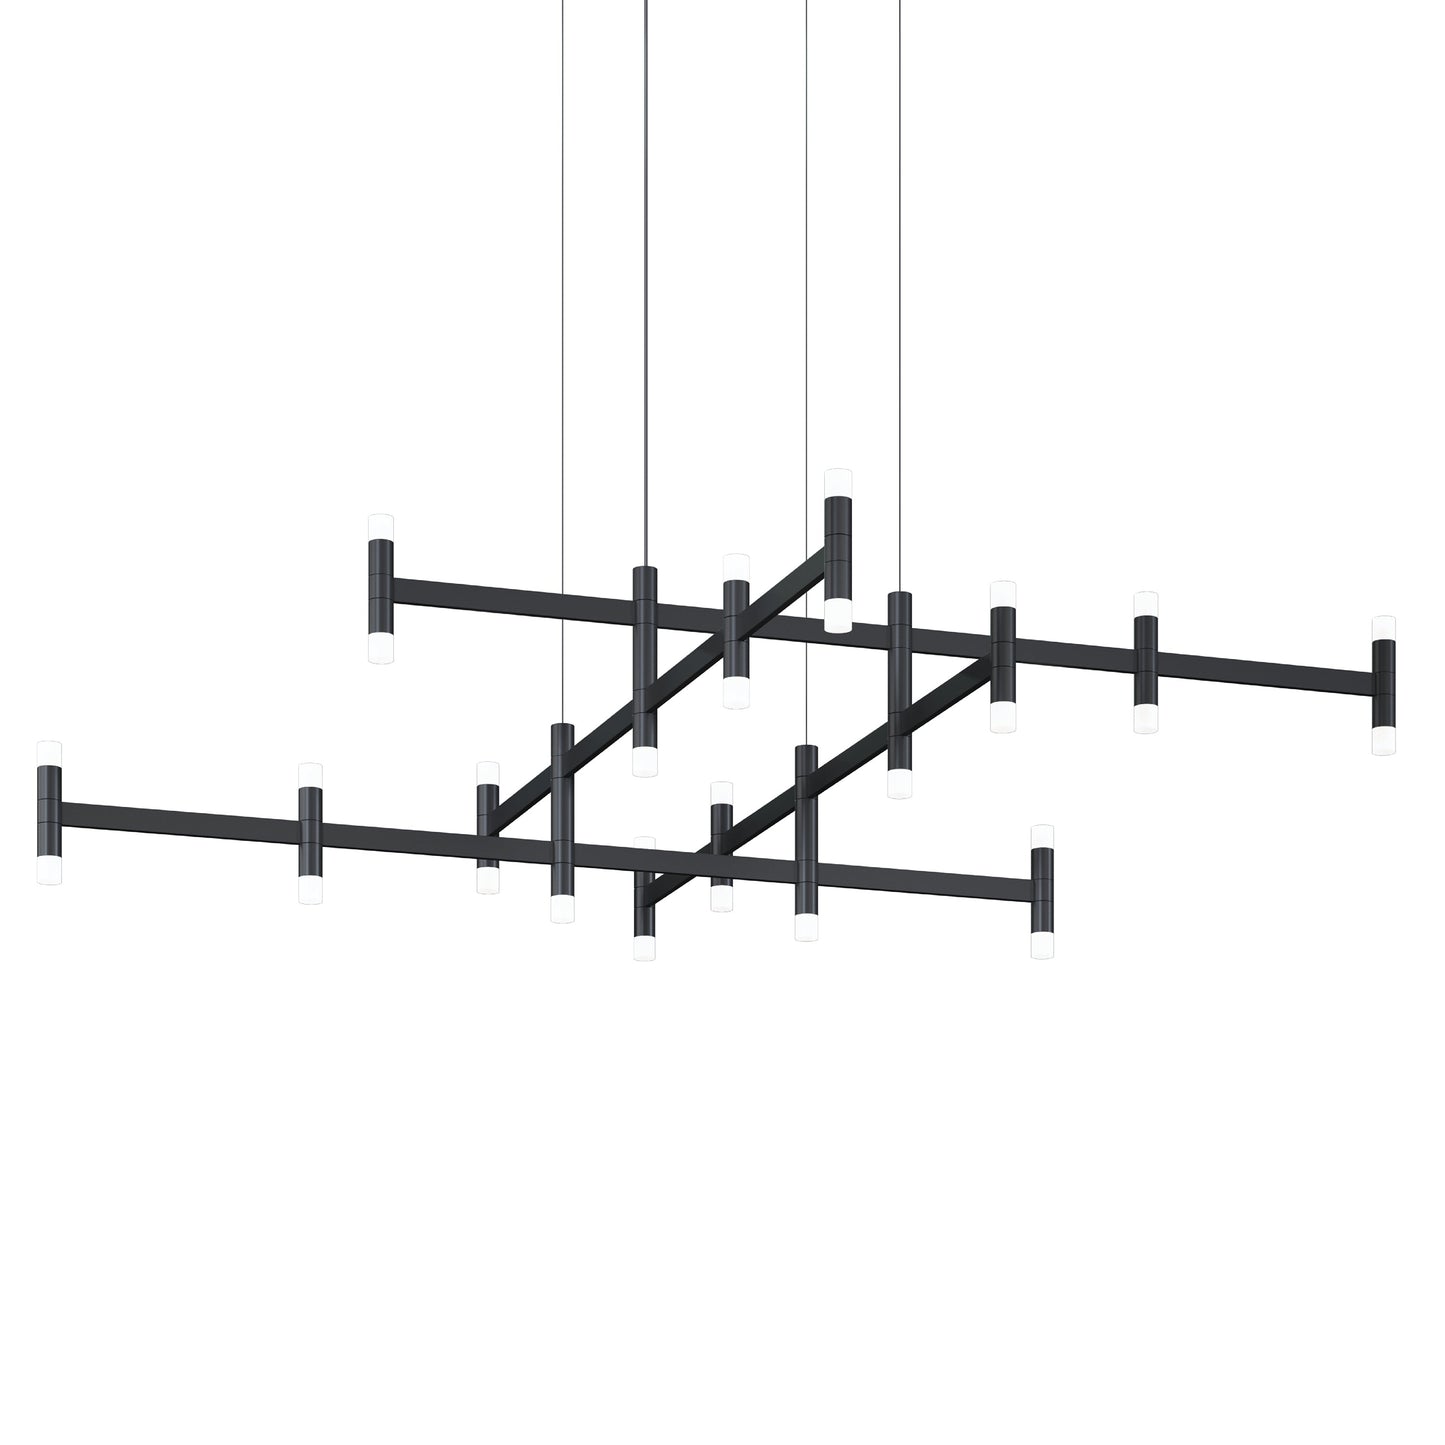 Systema Staccato Hash Pendant Light